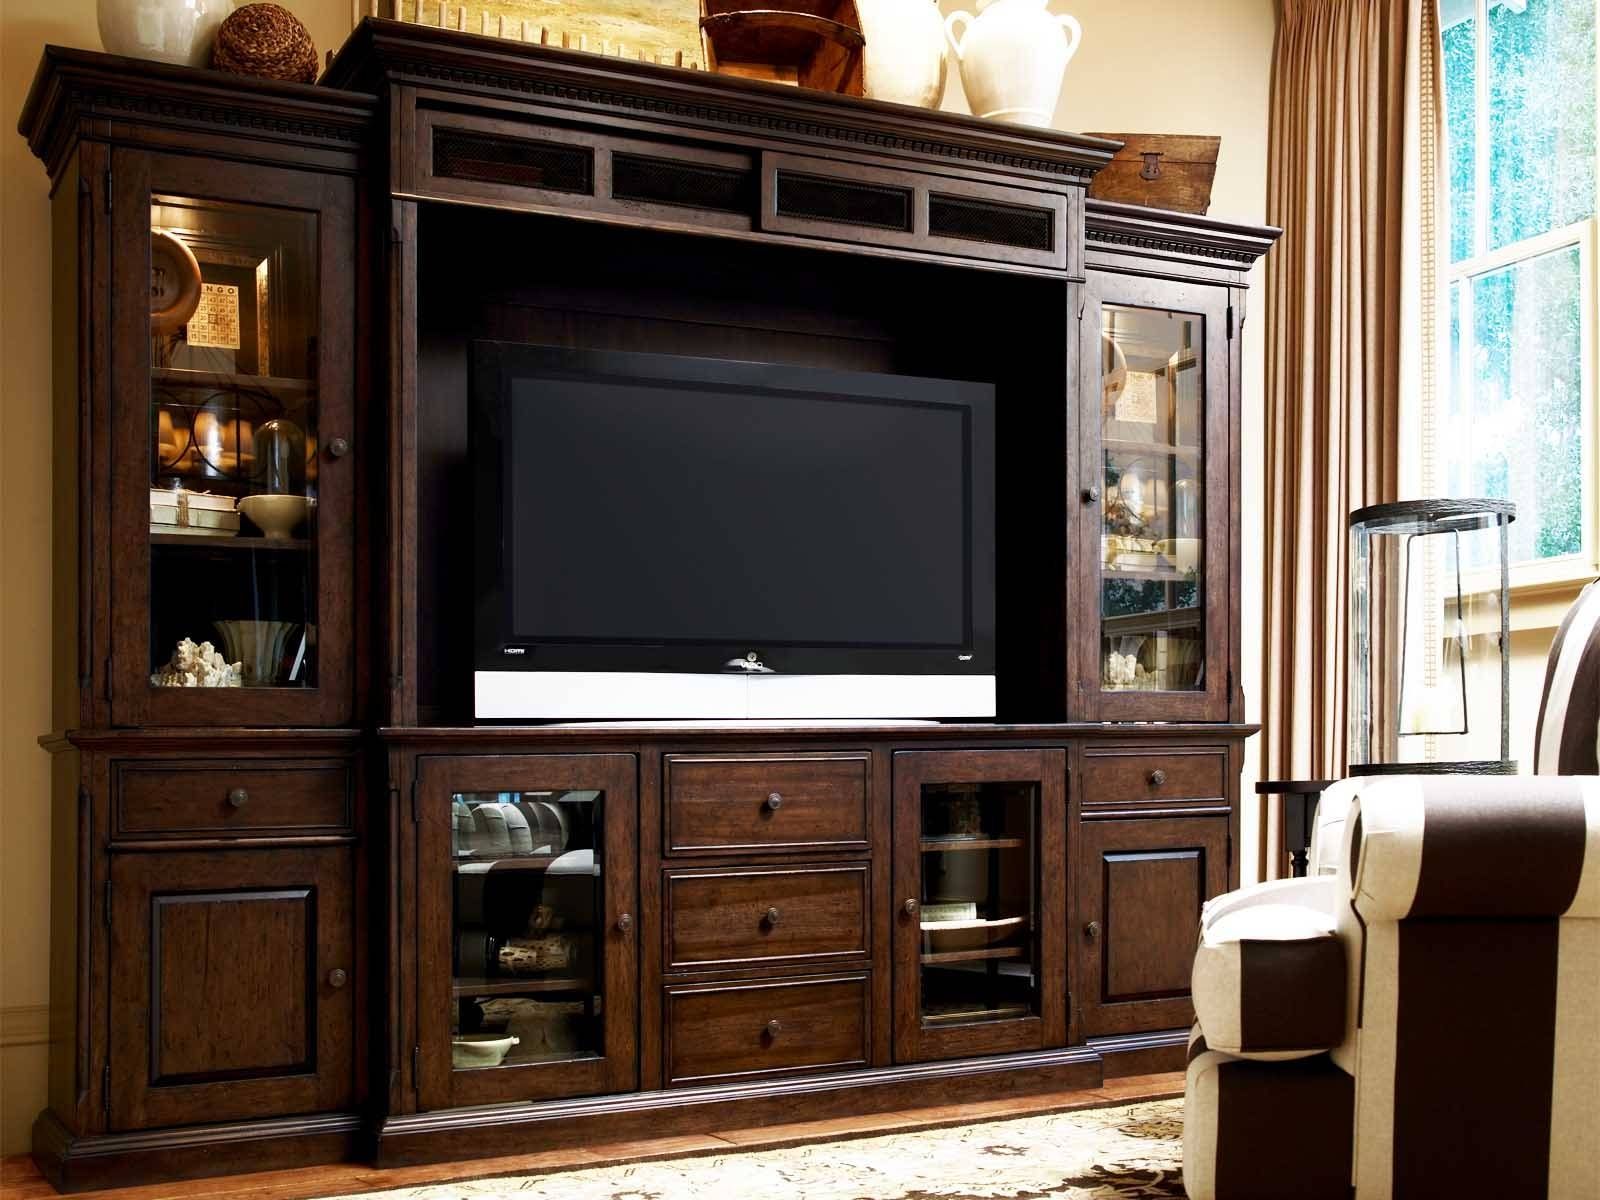 Excellent Polished Wood Enclosed Tv Cabinets For Flat Screens With Regarding Enclosed Tv Cabinets For Flat Screens With Doors (View 10 of 15)